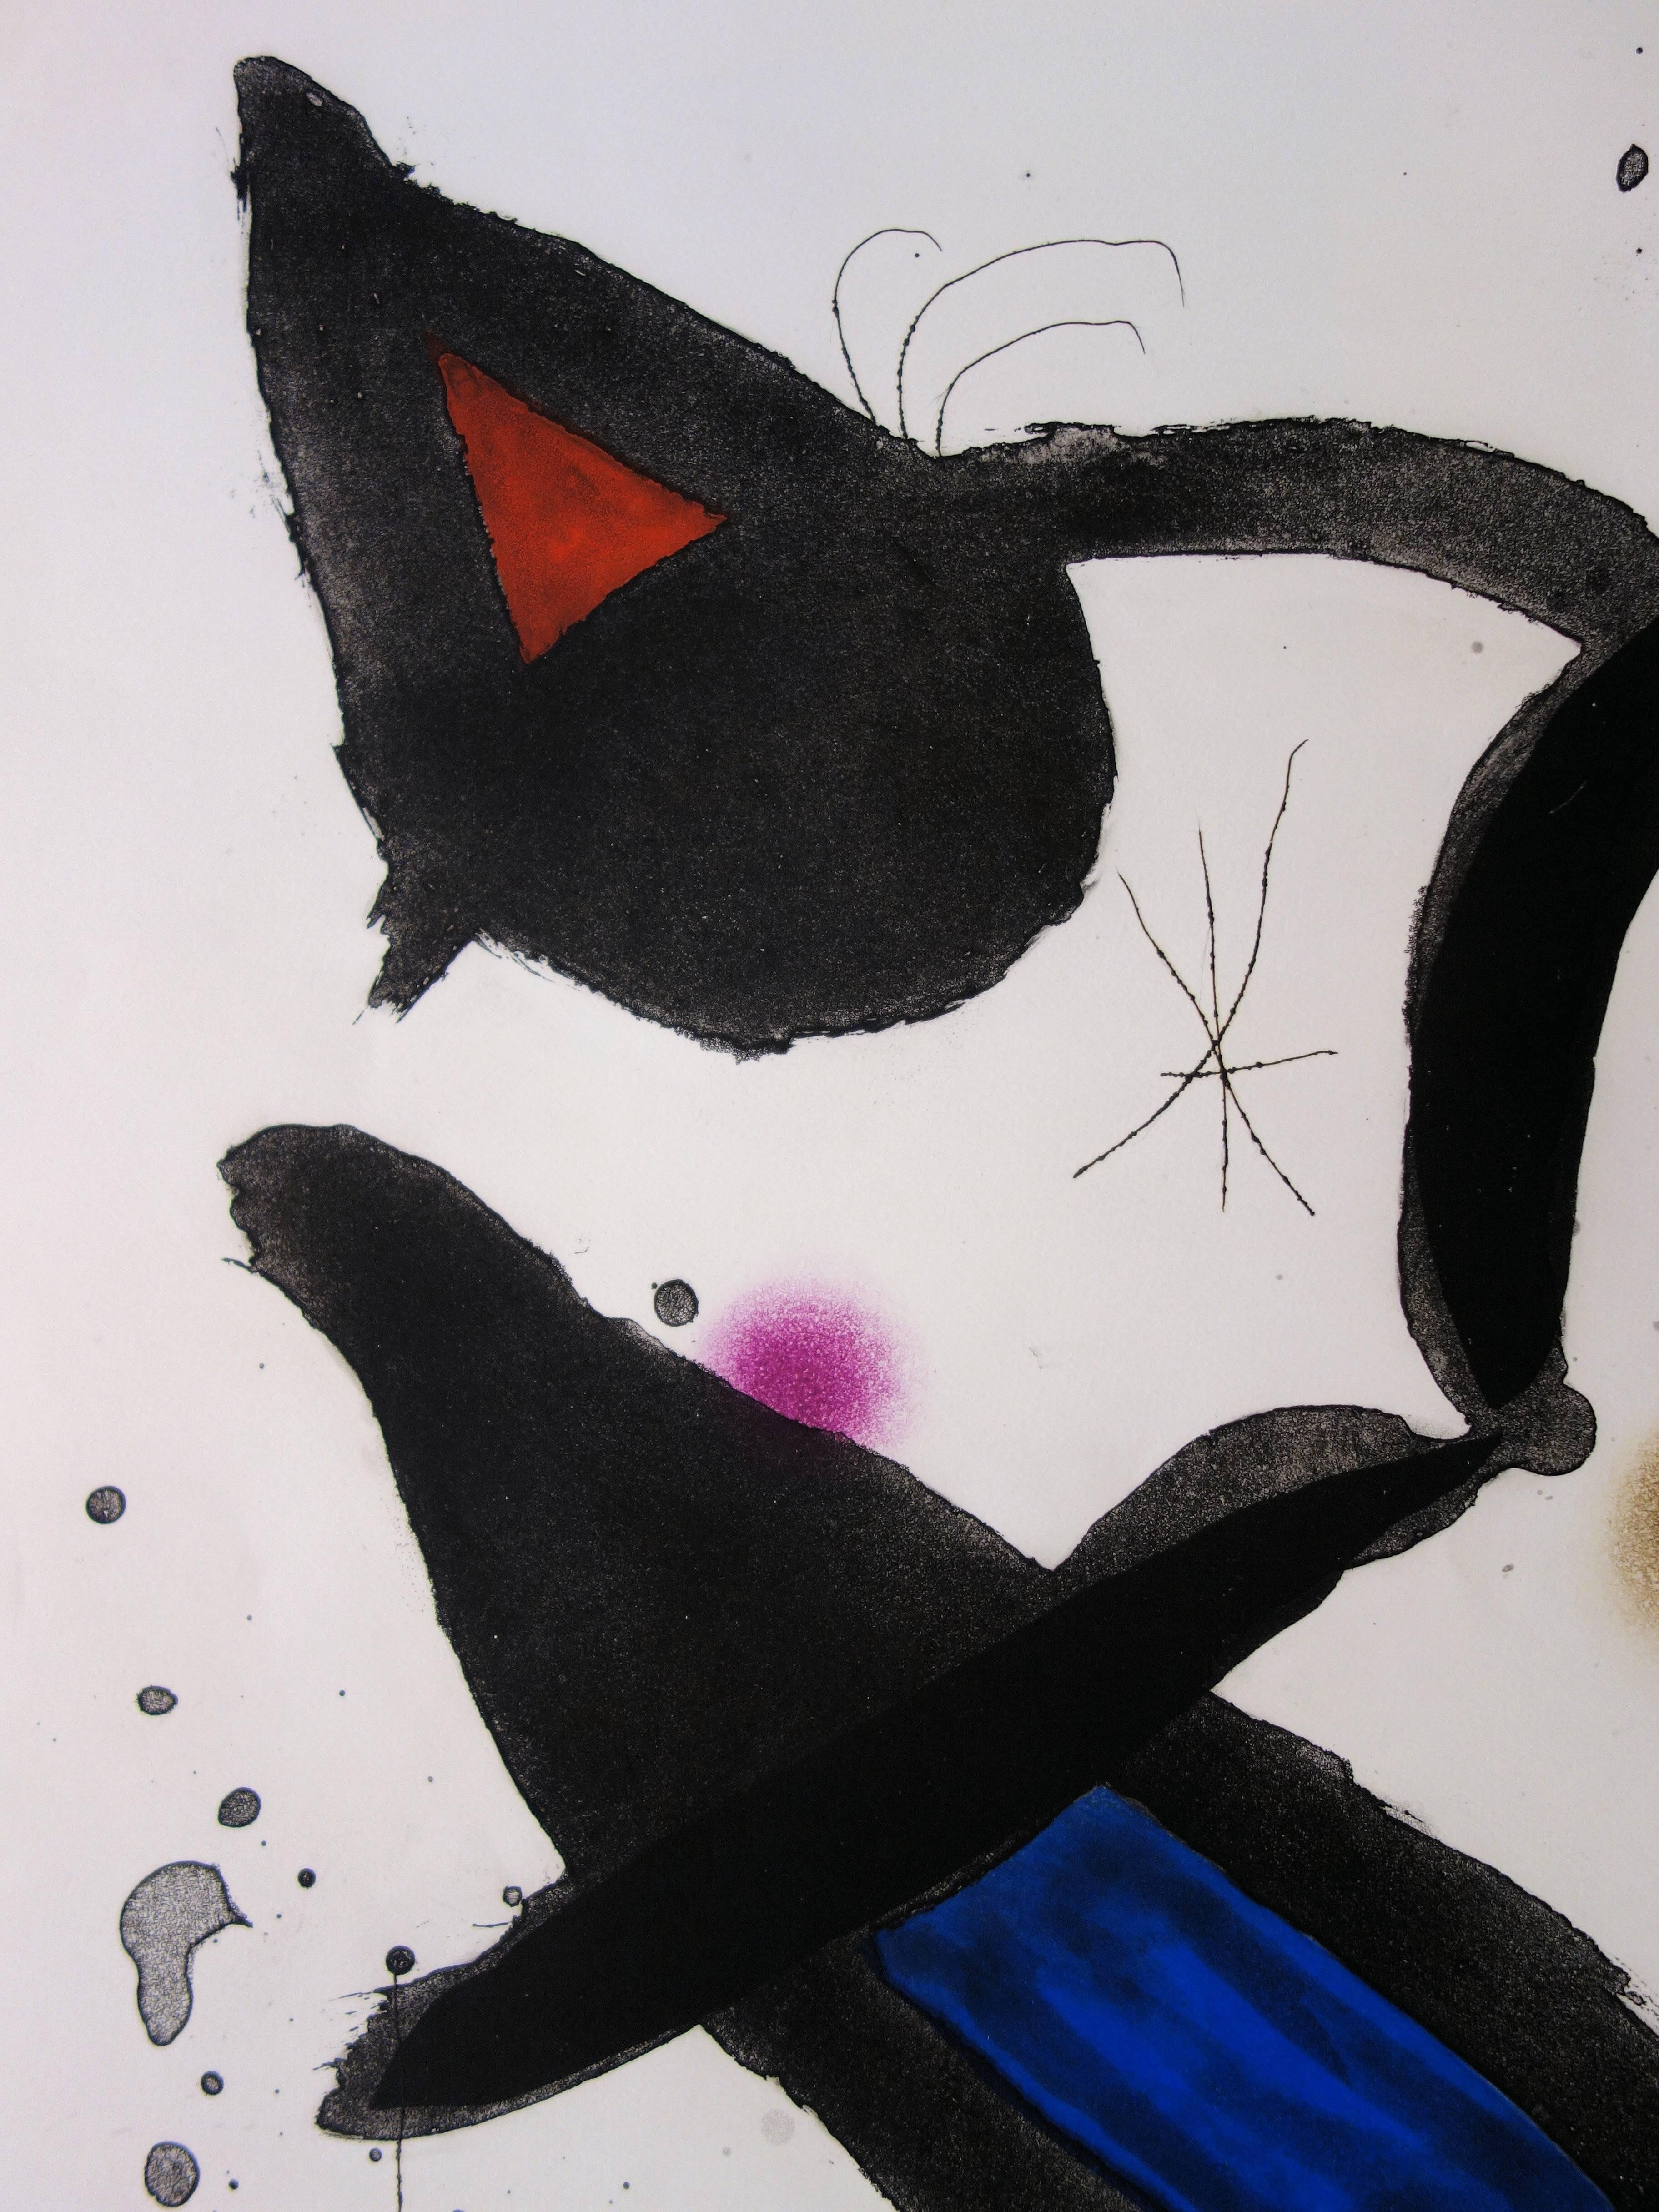 Joan MIRO
King David, 1972

Original etching and aquatint
Pencil signed bottom right
Annotated HC (an hors commerce impression outside of the edition of  50)
On Arches vellum 91 x 63 cm (c. 36 x 25 inch)

REFERENCES : Catalog raisonne Dupin